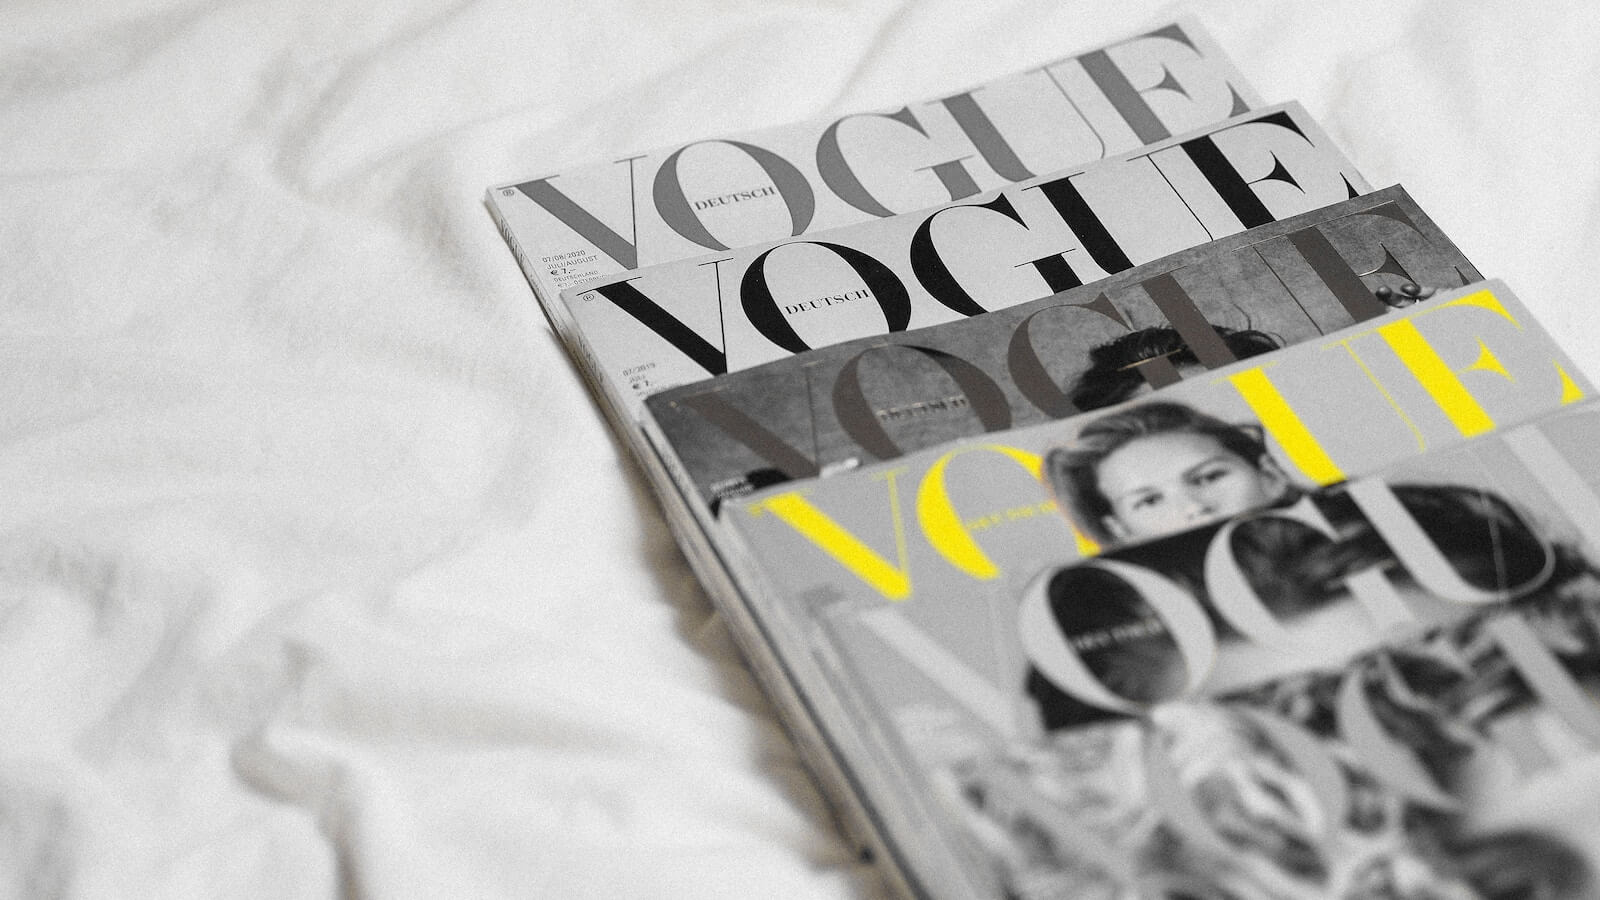 Vogue France - Have sports become the new fashion influencer